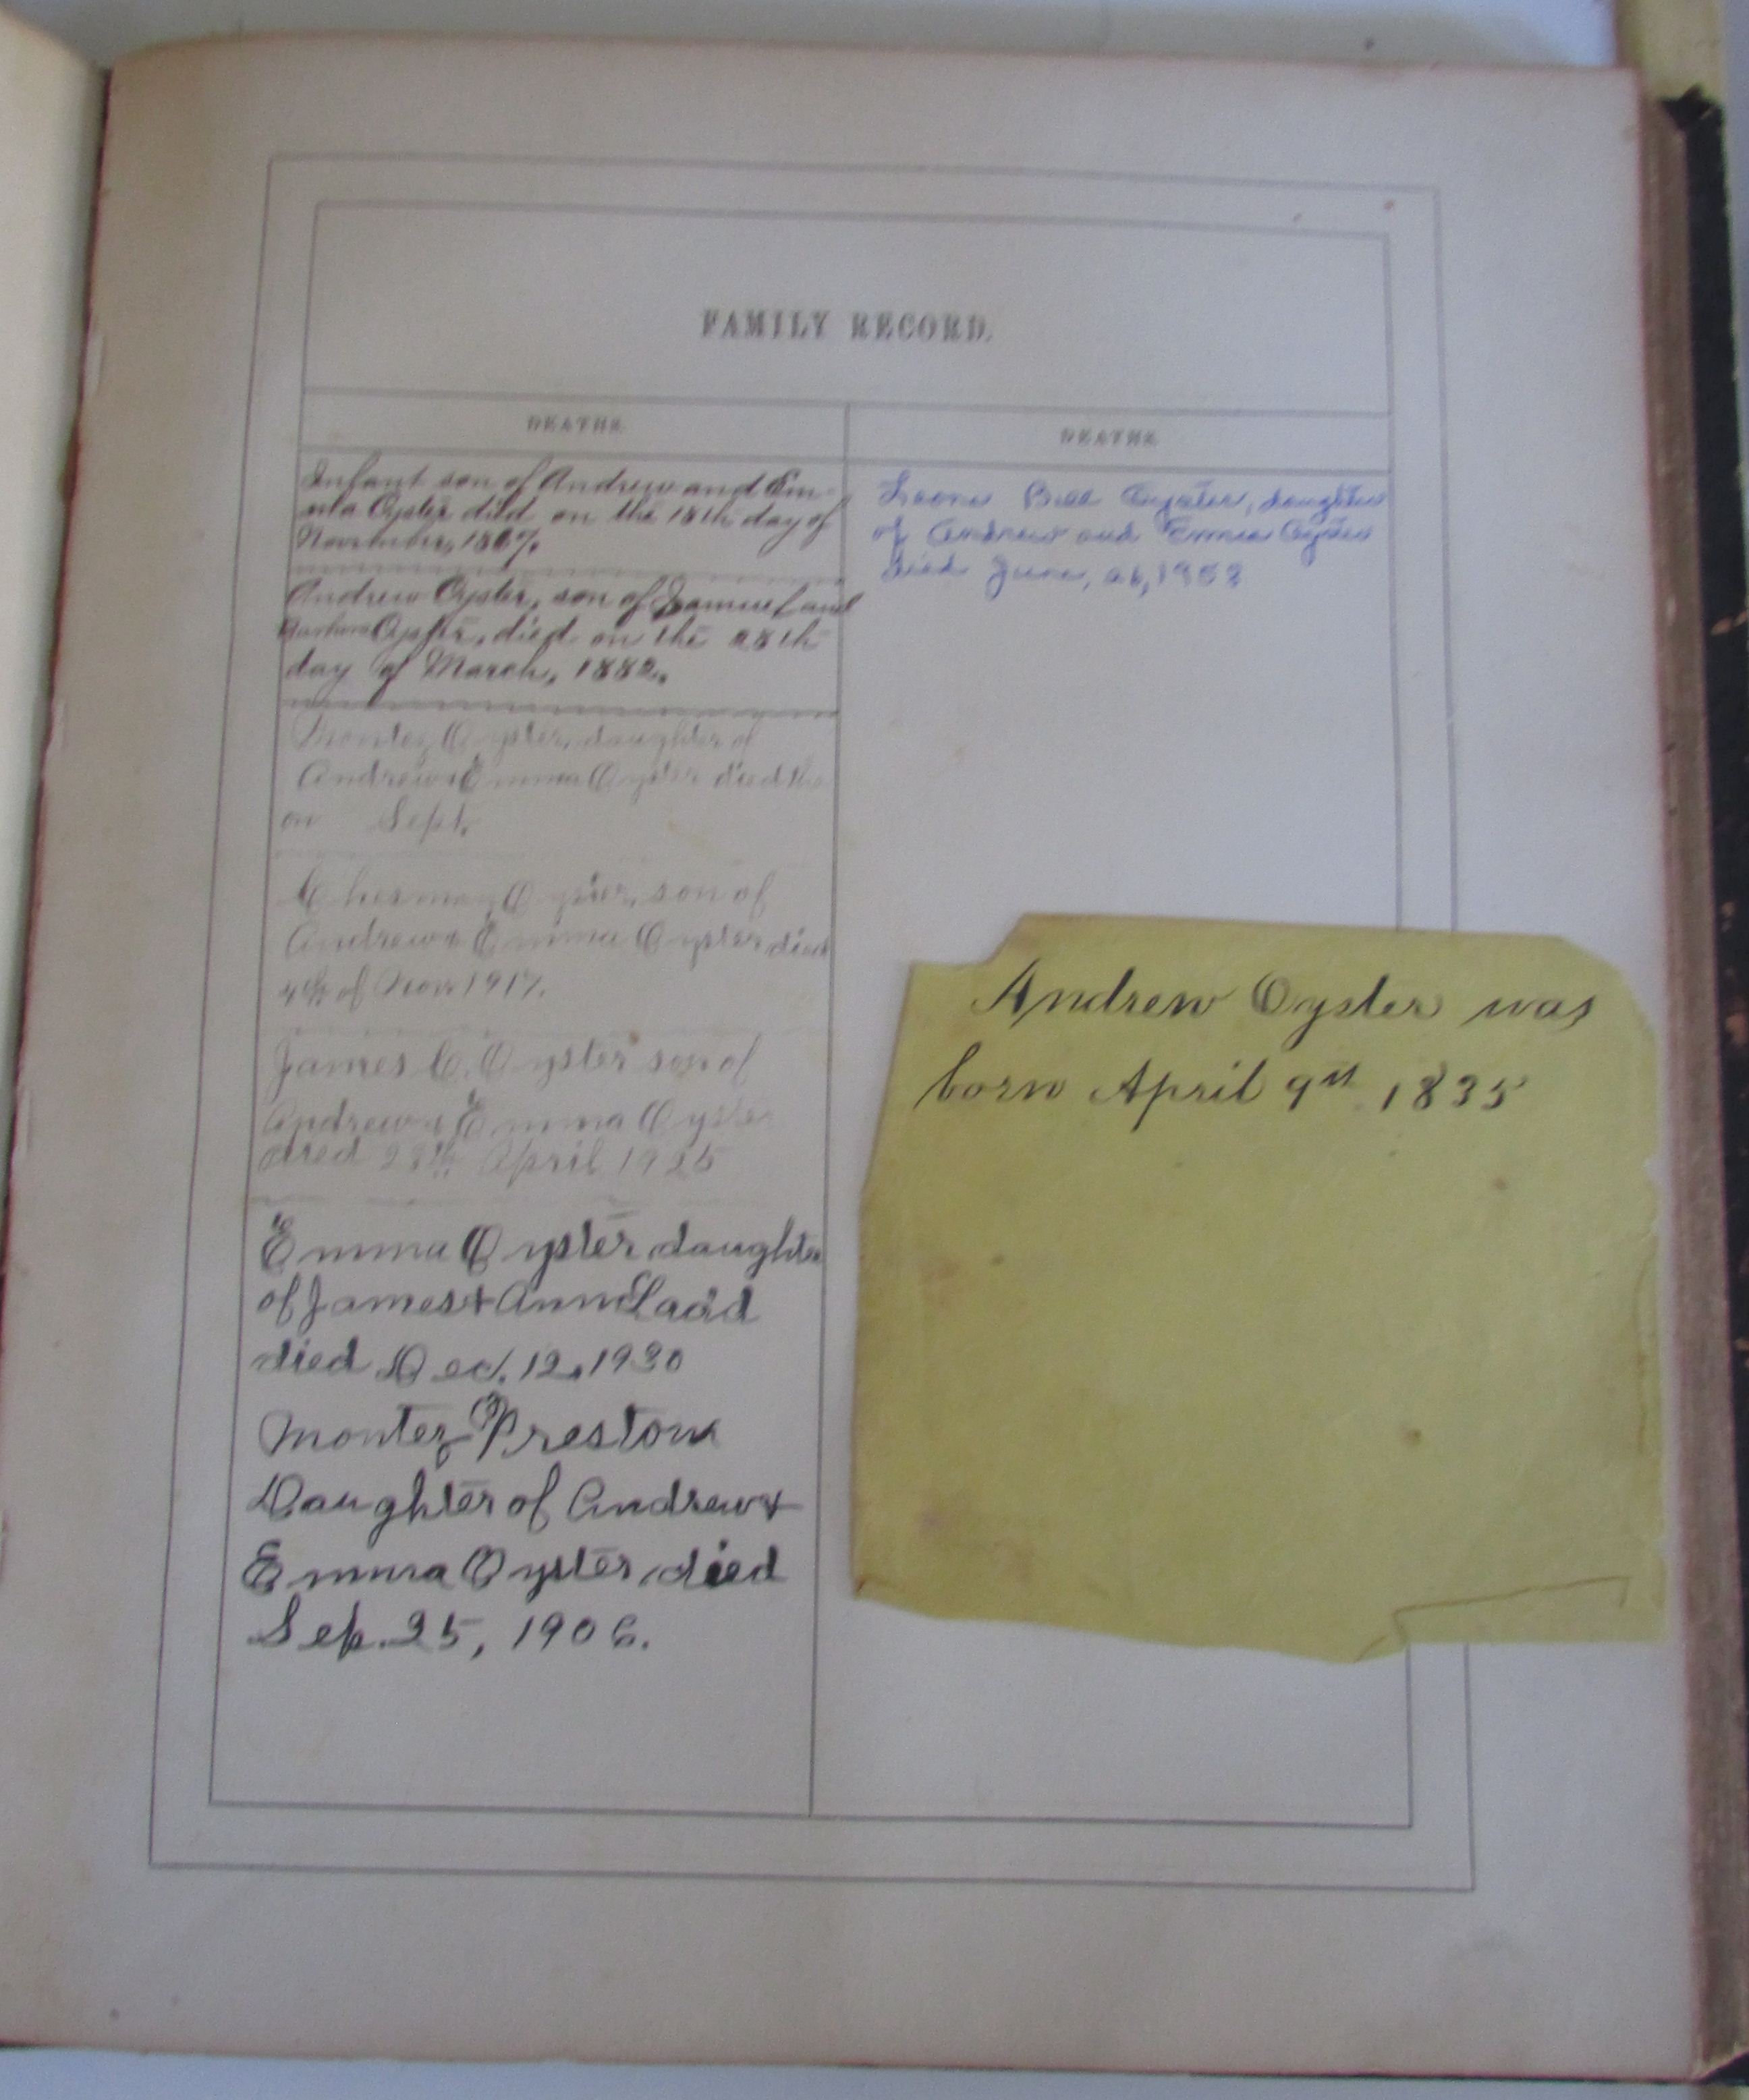 Third inscribed Family Record page with note